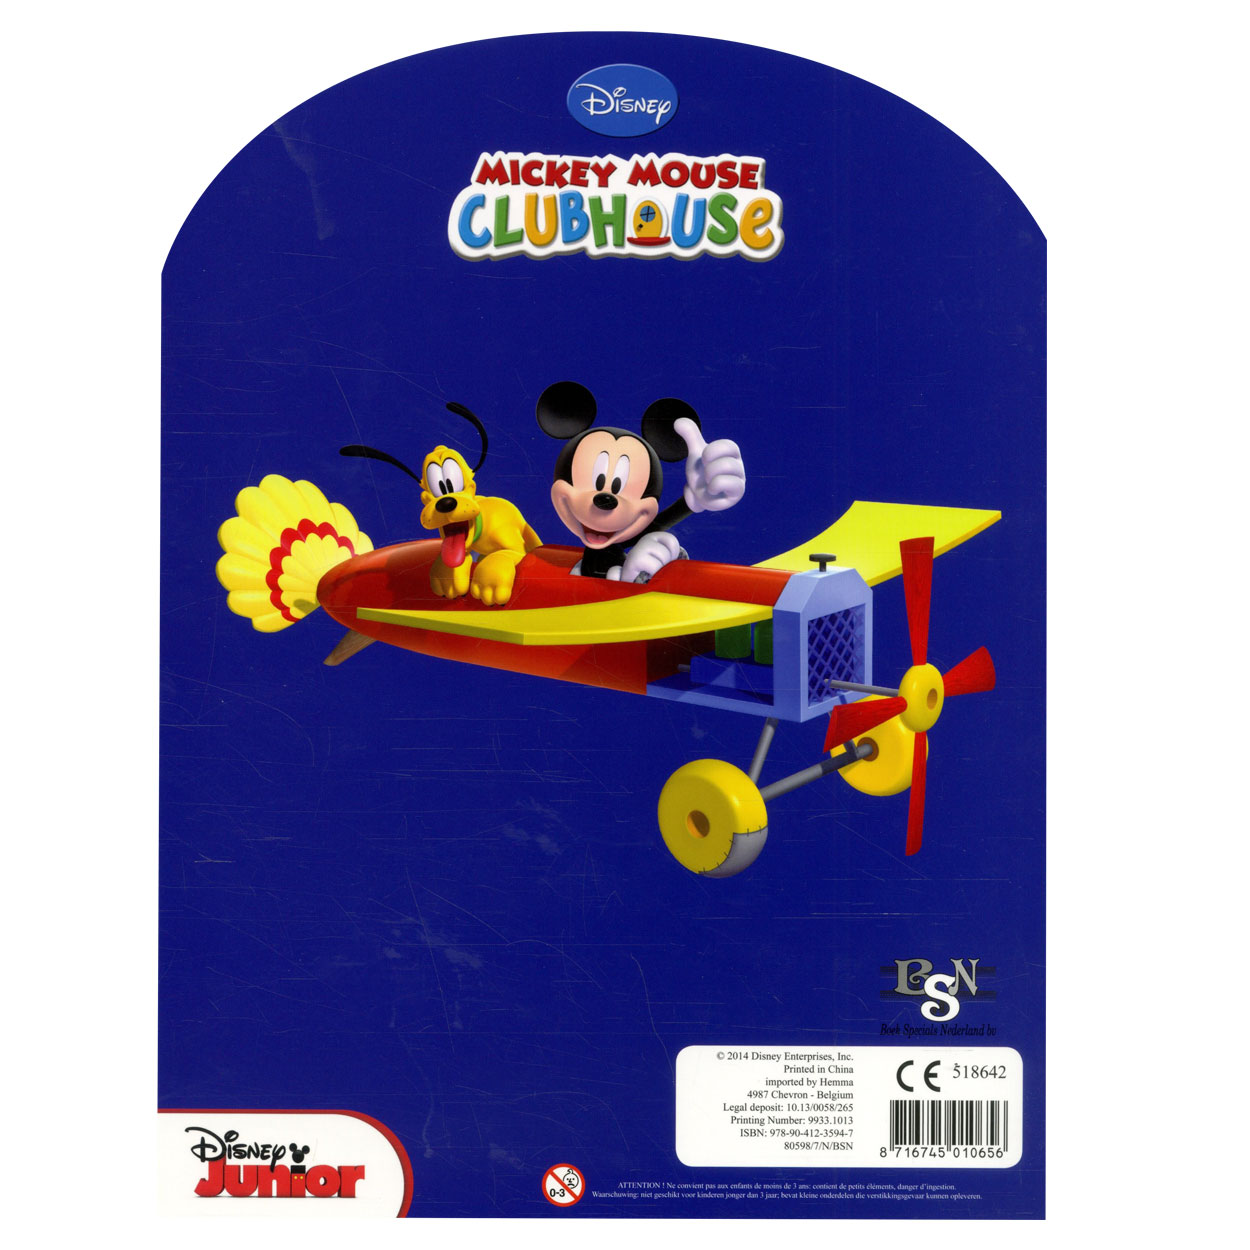 Disney Sticker & Color - Mickey Mouse